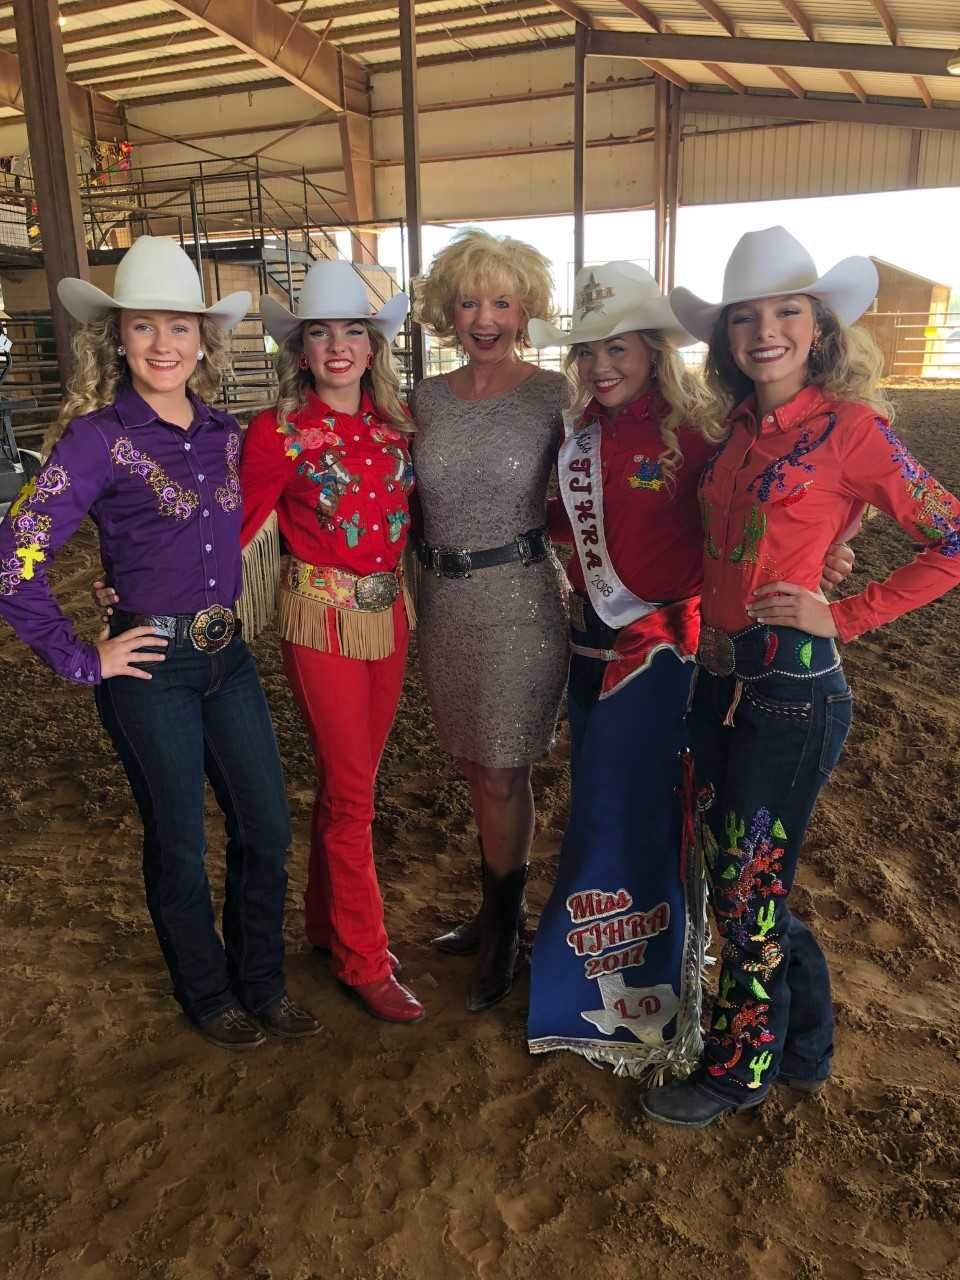 Gonzales Mayor Connie Kacir greets some of the Texas Junior High Rodeo Association royalty at the recent event that concluded last week. After discussions and a vote, the association decided to return to town for the next five years on a near unanimous decision. Pictured with Mayor Kacir (middle) are (from left) Katelynn Miller second runner up, Genevieve Blanchard first runner up, Laramie Dearing 2017-18 Princess and Amber Simons 2018-19 Princess.